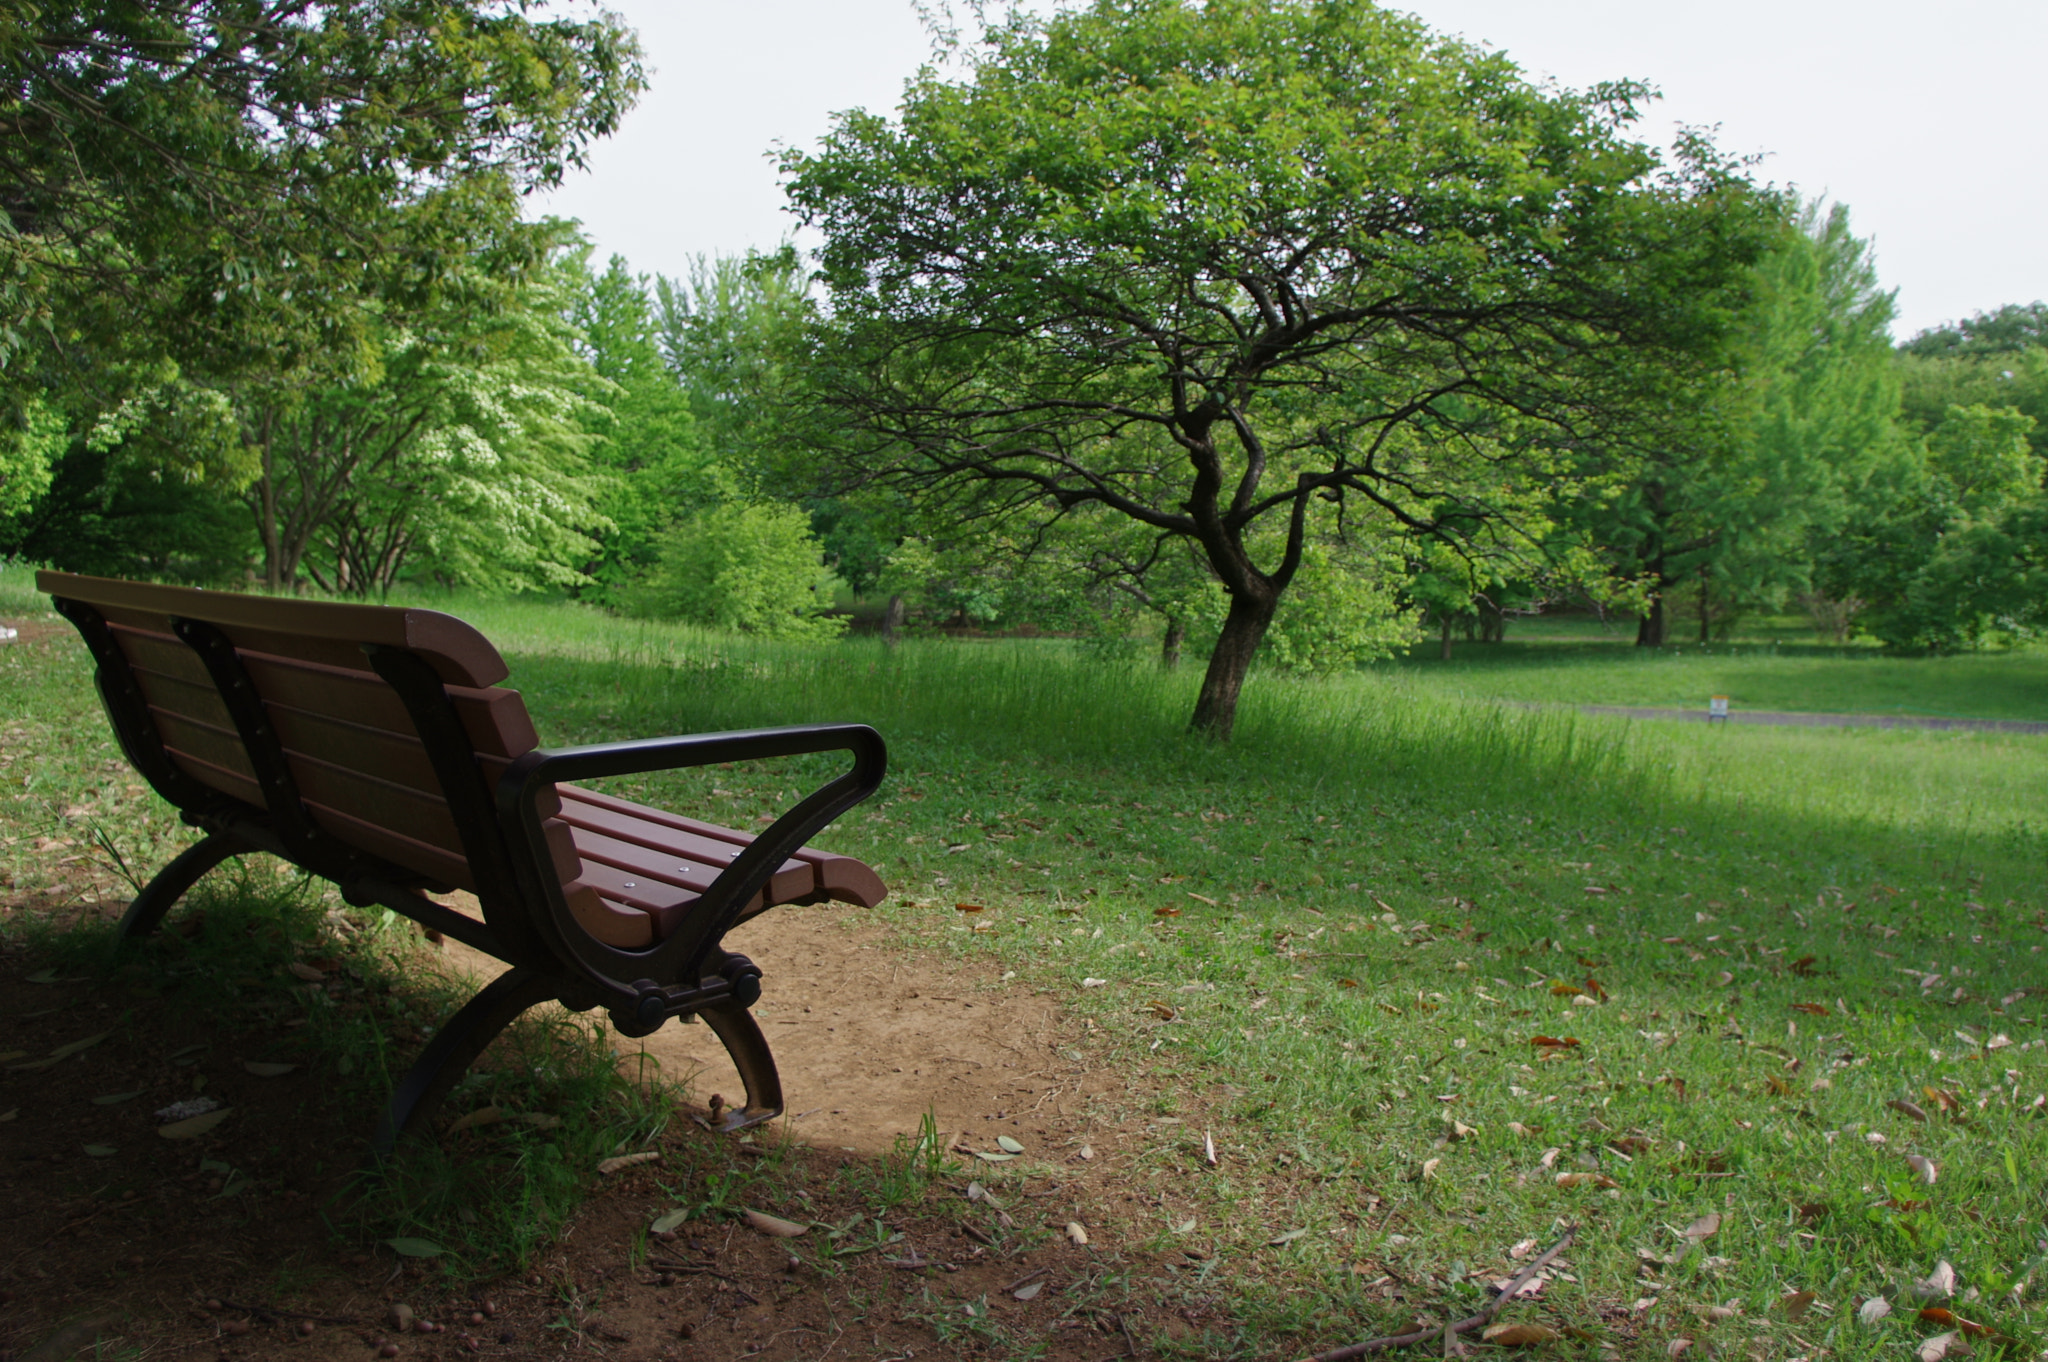 Pentax K-3 sample photo. The benches are one of my themes... photography